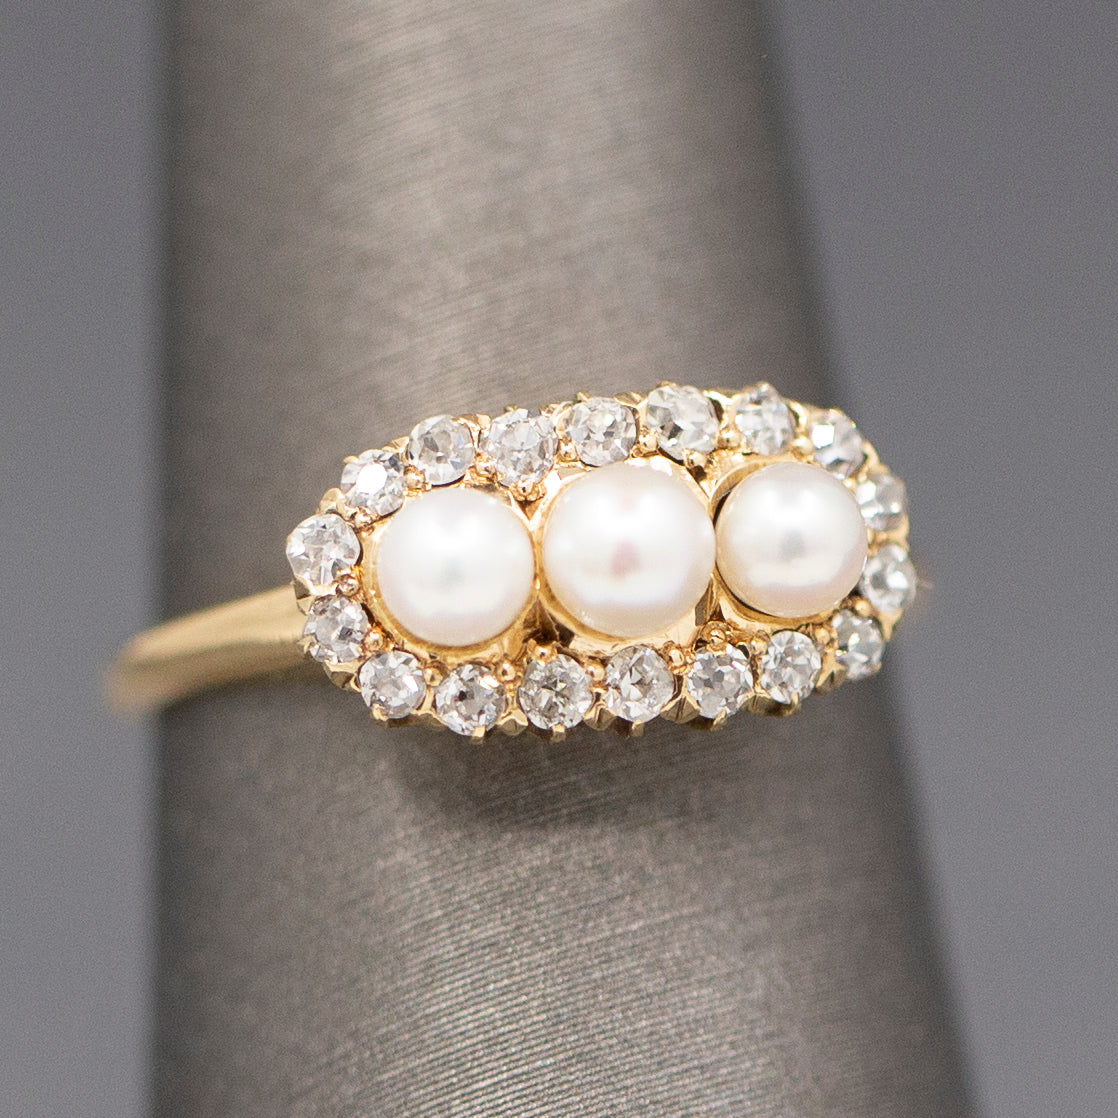 Antique Edwardian Three Stone Pearl Ring with Old Mine Cut Diamond Halo in 14k Yellow Gold